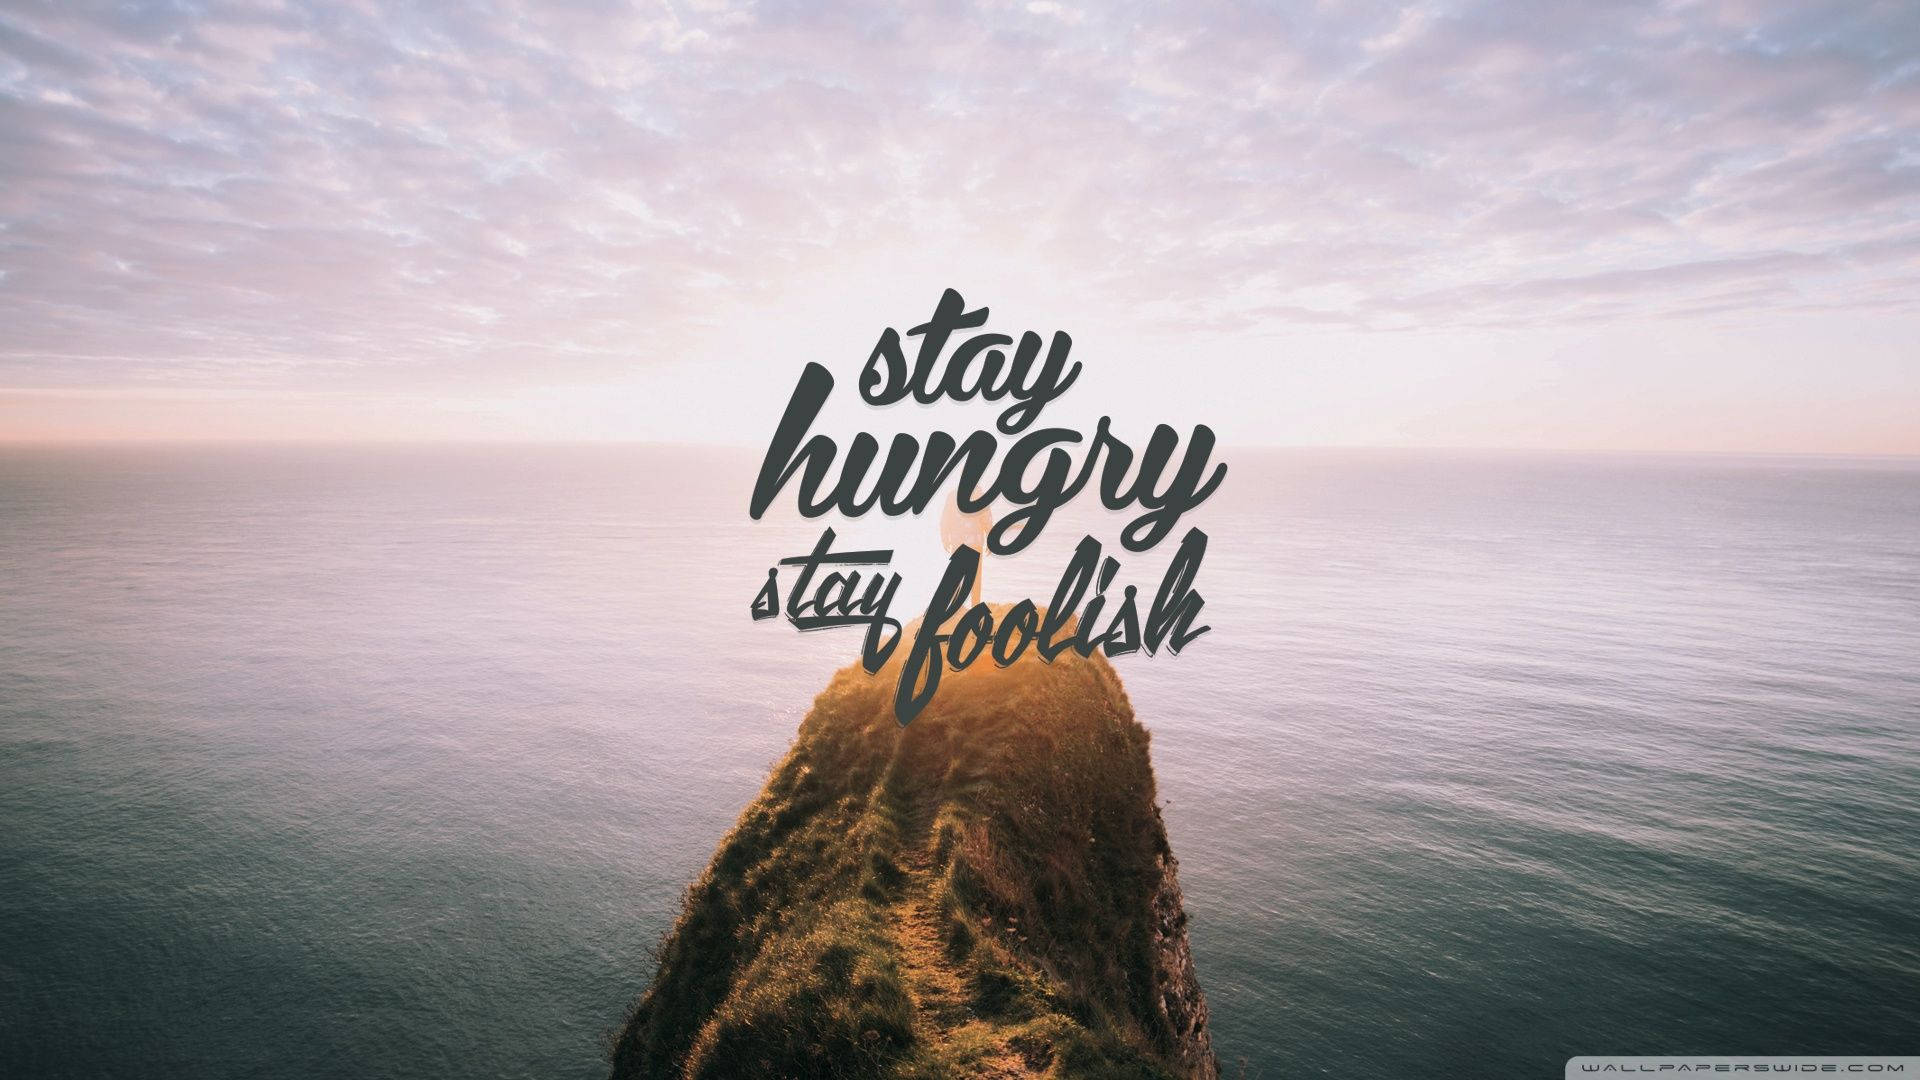 Simple yet meaningful inspiration quotes desktop wallpaper.